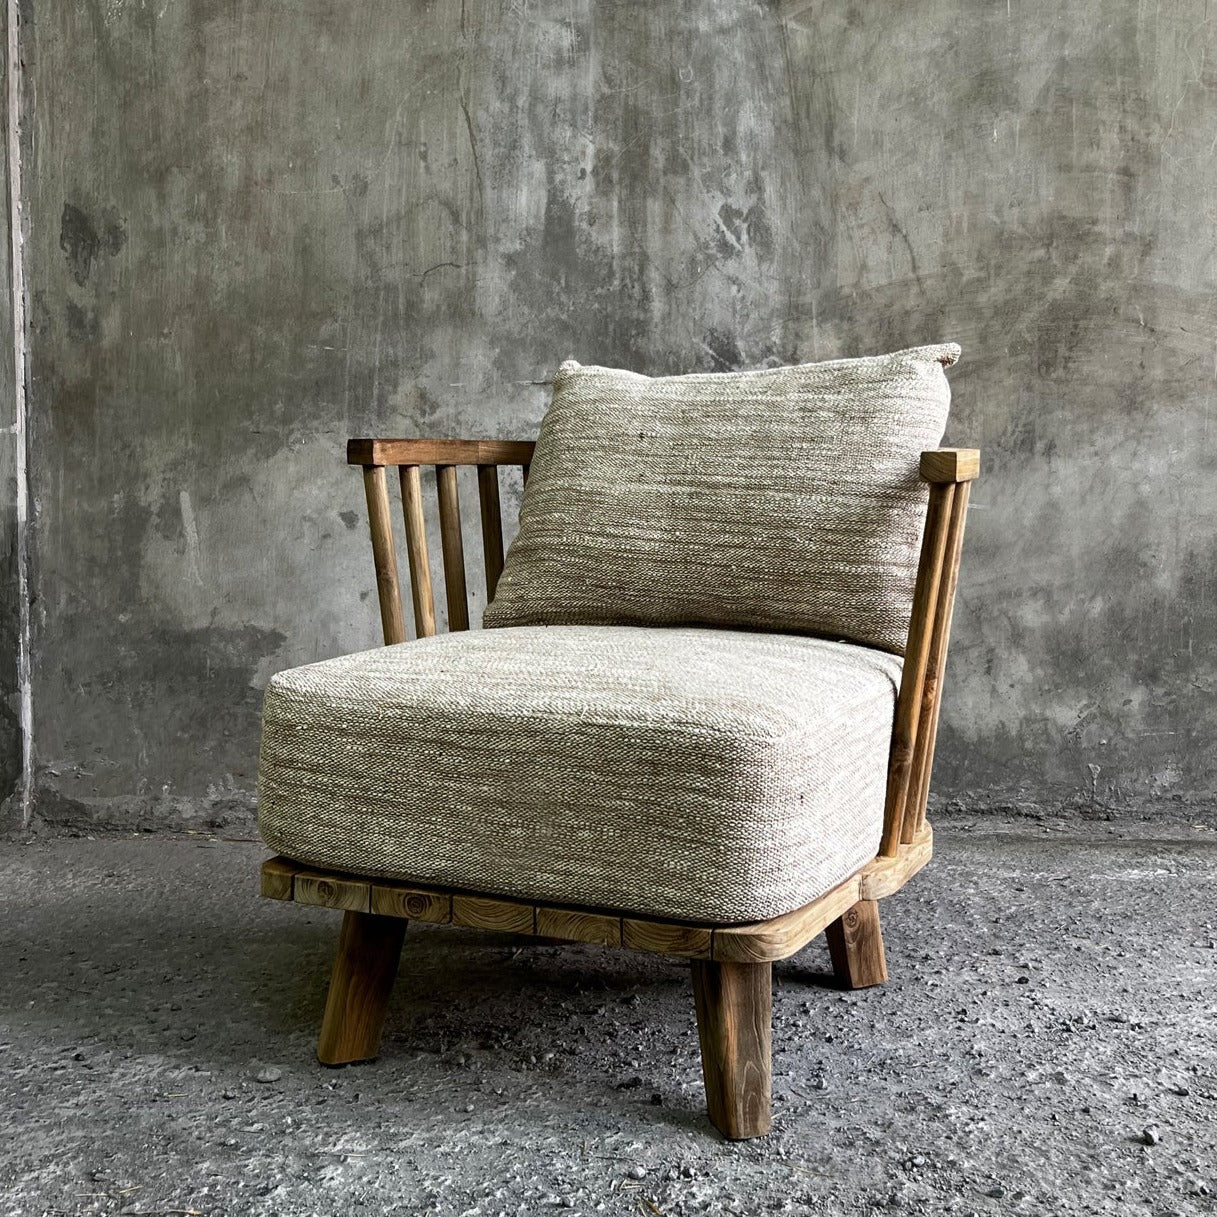 THE MALAWI One Seater - Natural Beige